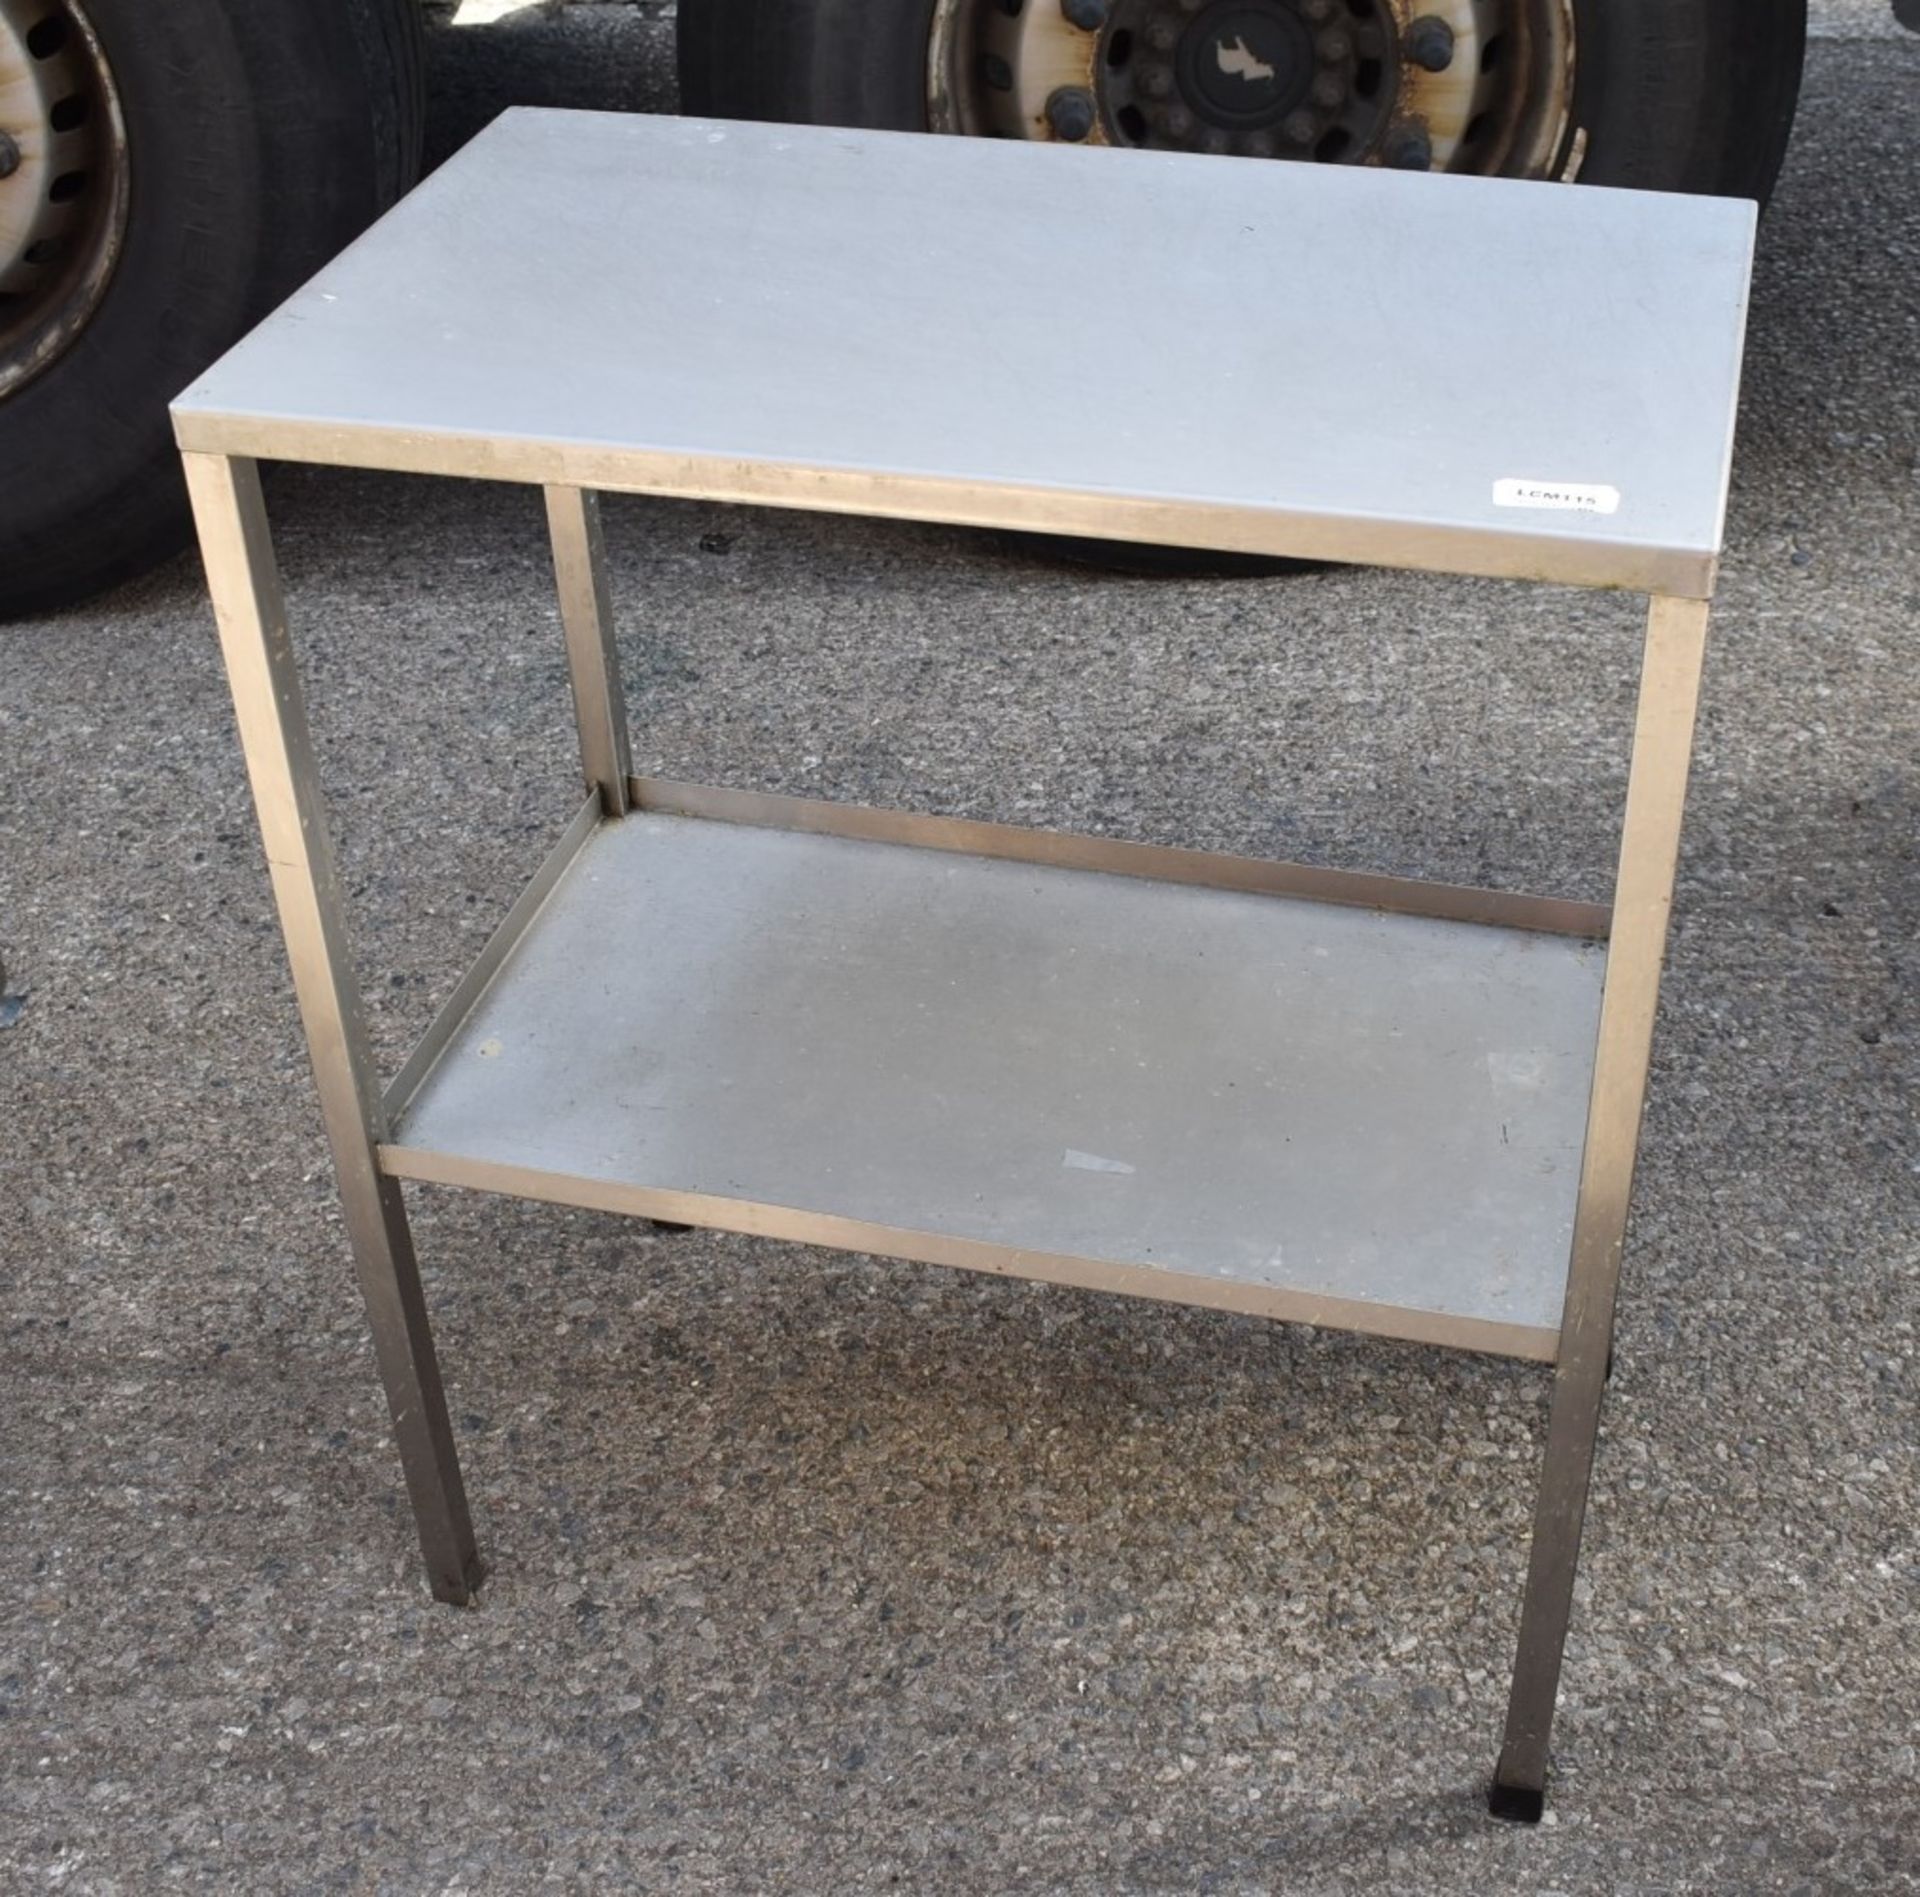 1 x Stainless Steel Prep Table With Undershelf - Dimensions: H83 x W40 x D70 cms - Recently